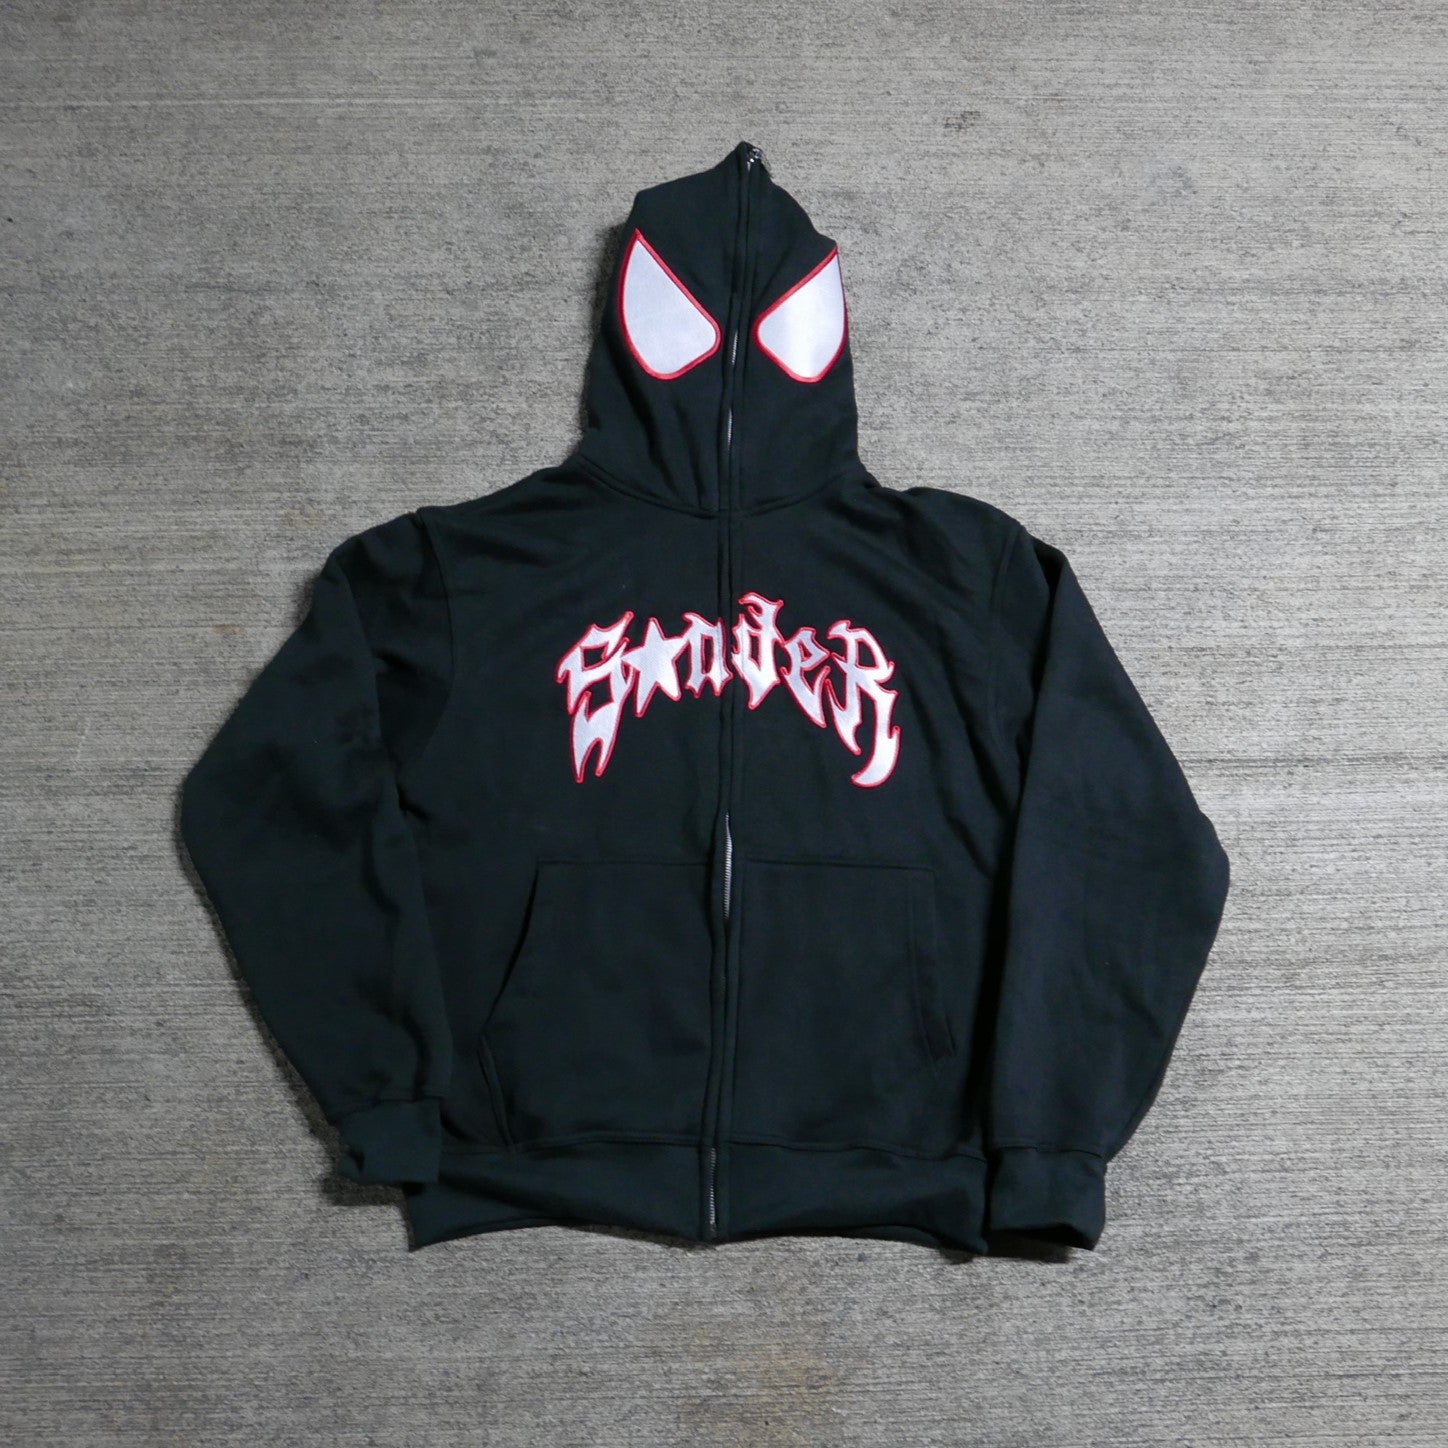 Spider Full-Zip in Black and Red